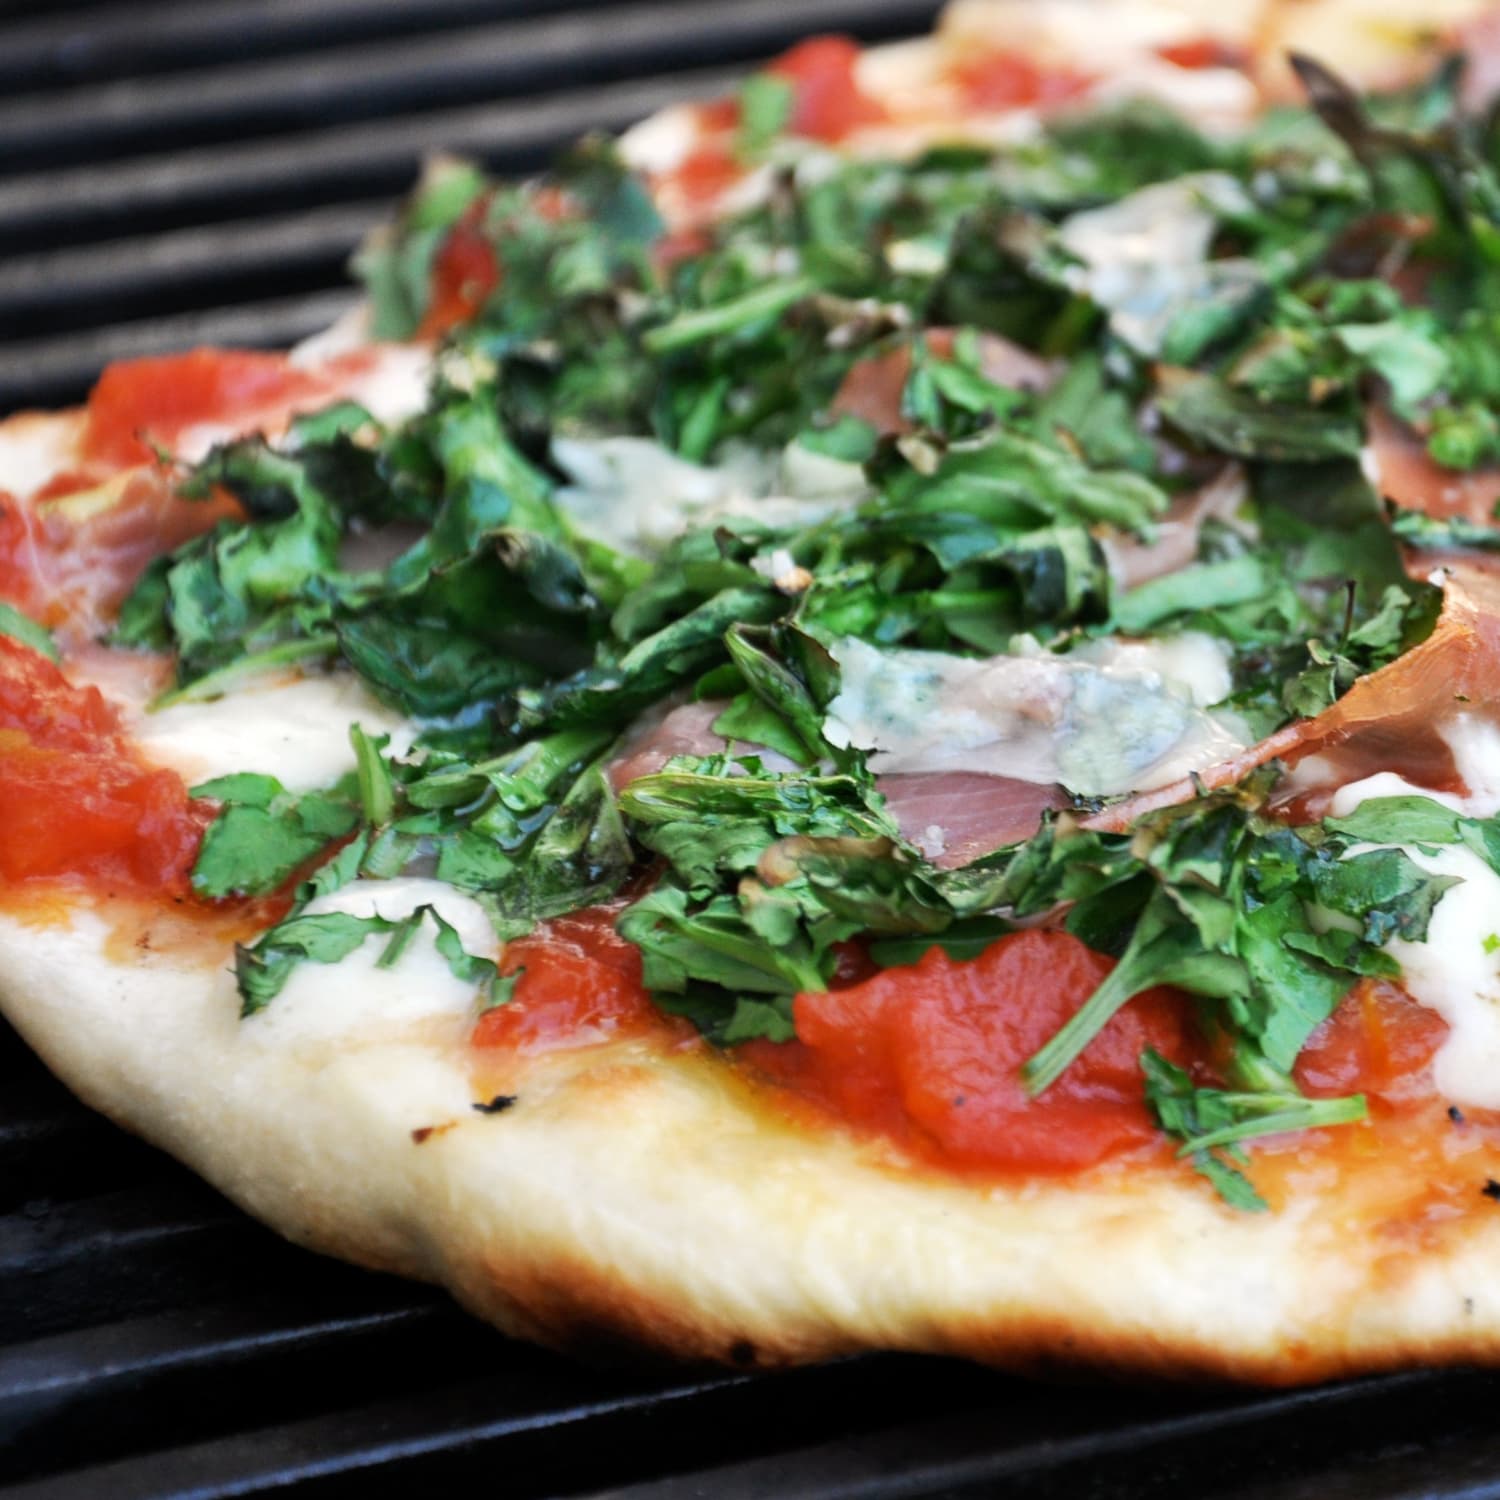 The BEST Grilled Pizza, Pizza on a Weber Grill